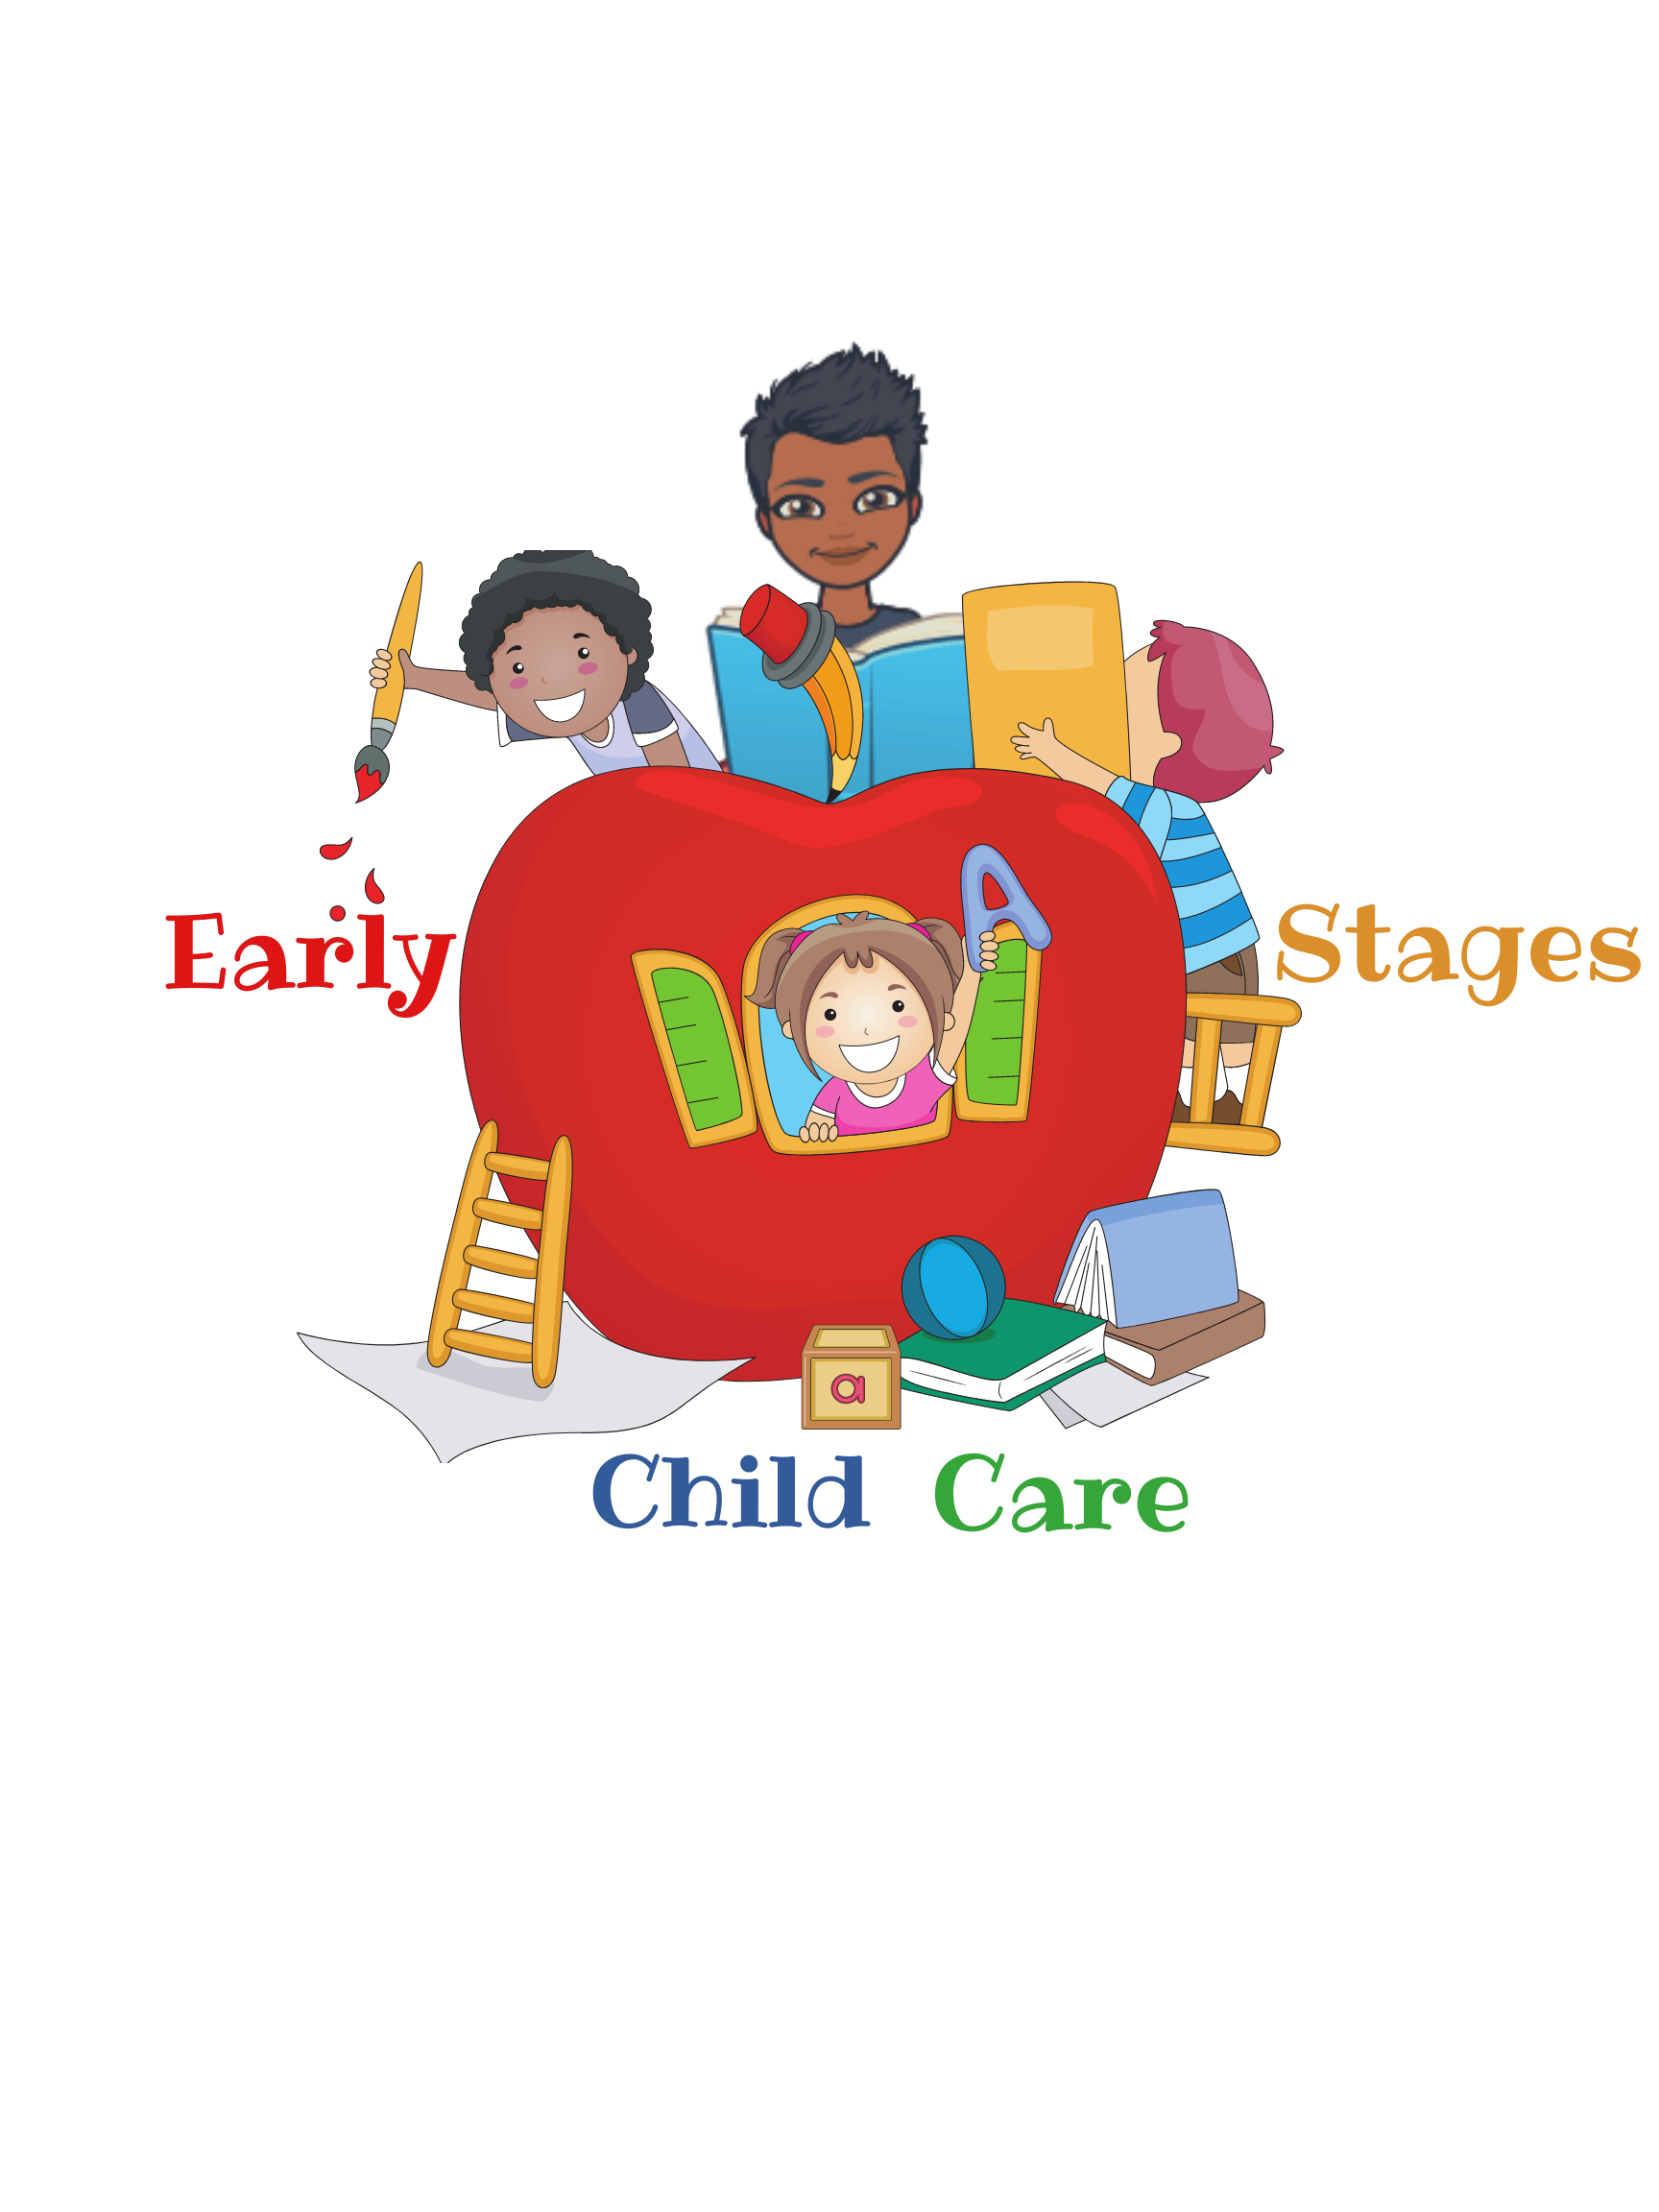 Early Stages Childcare Center logo